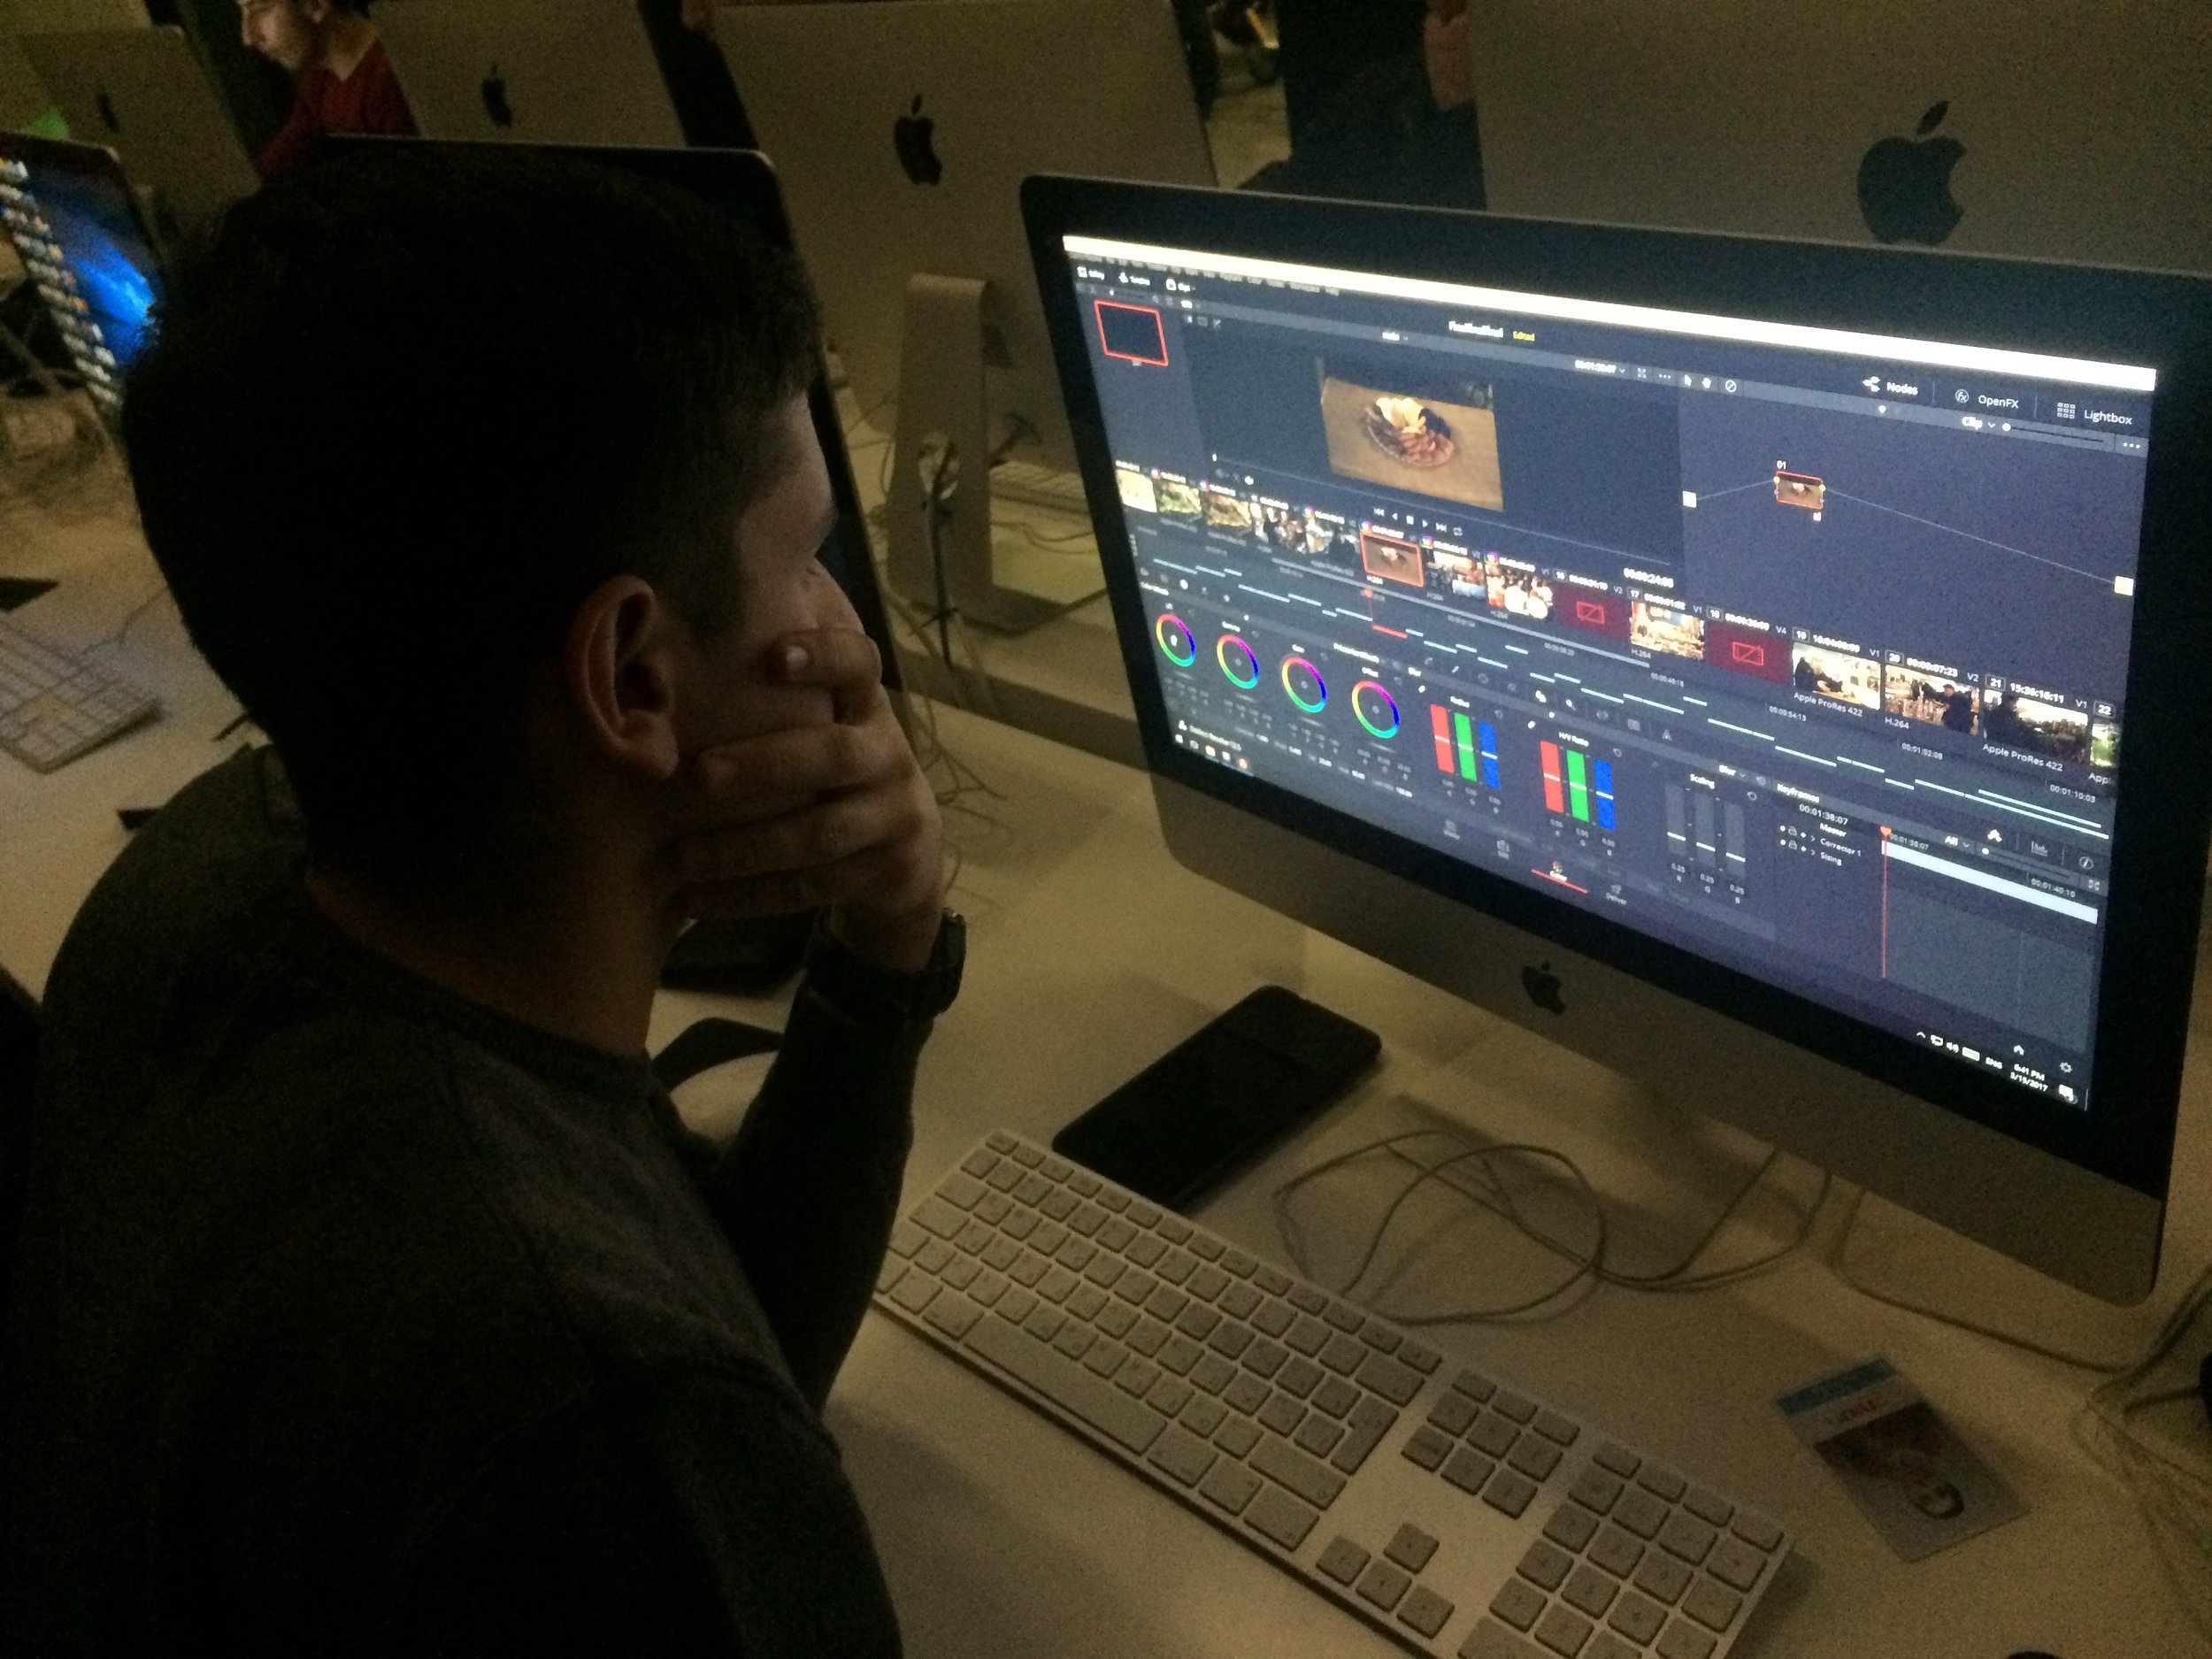 My amazing high school color grading students in Armenia at TUMO Center finishing their final project